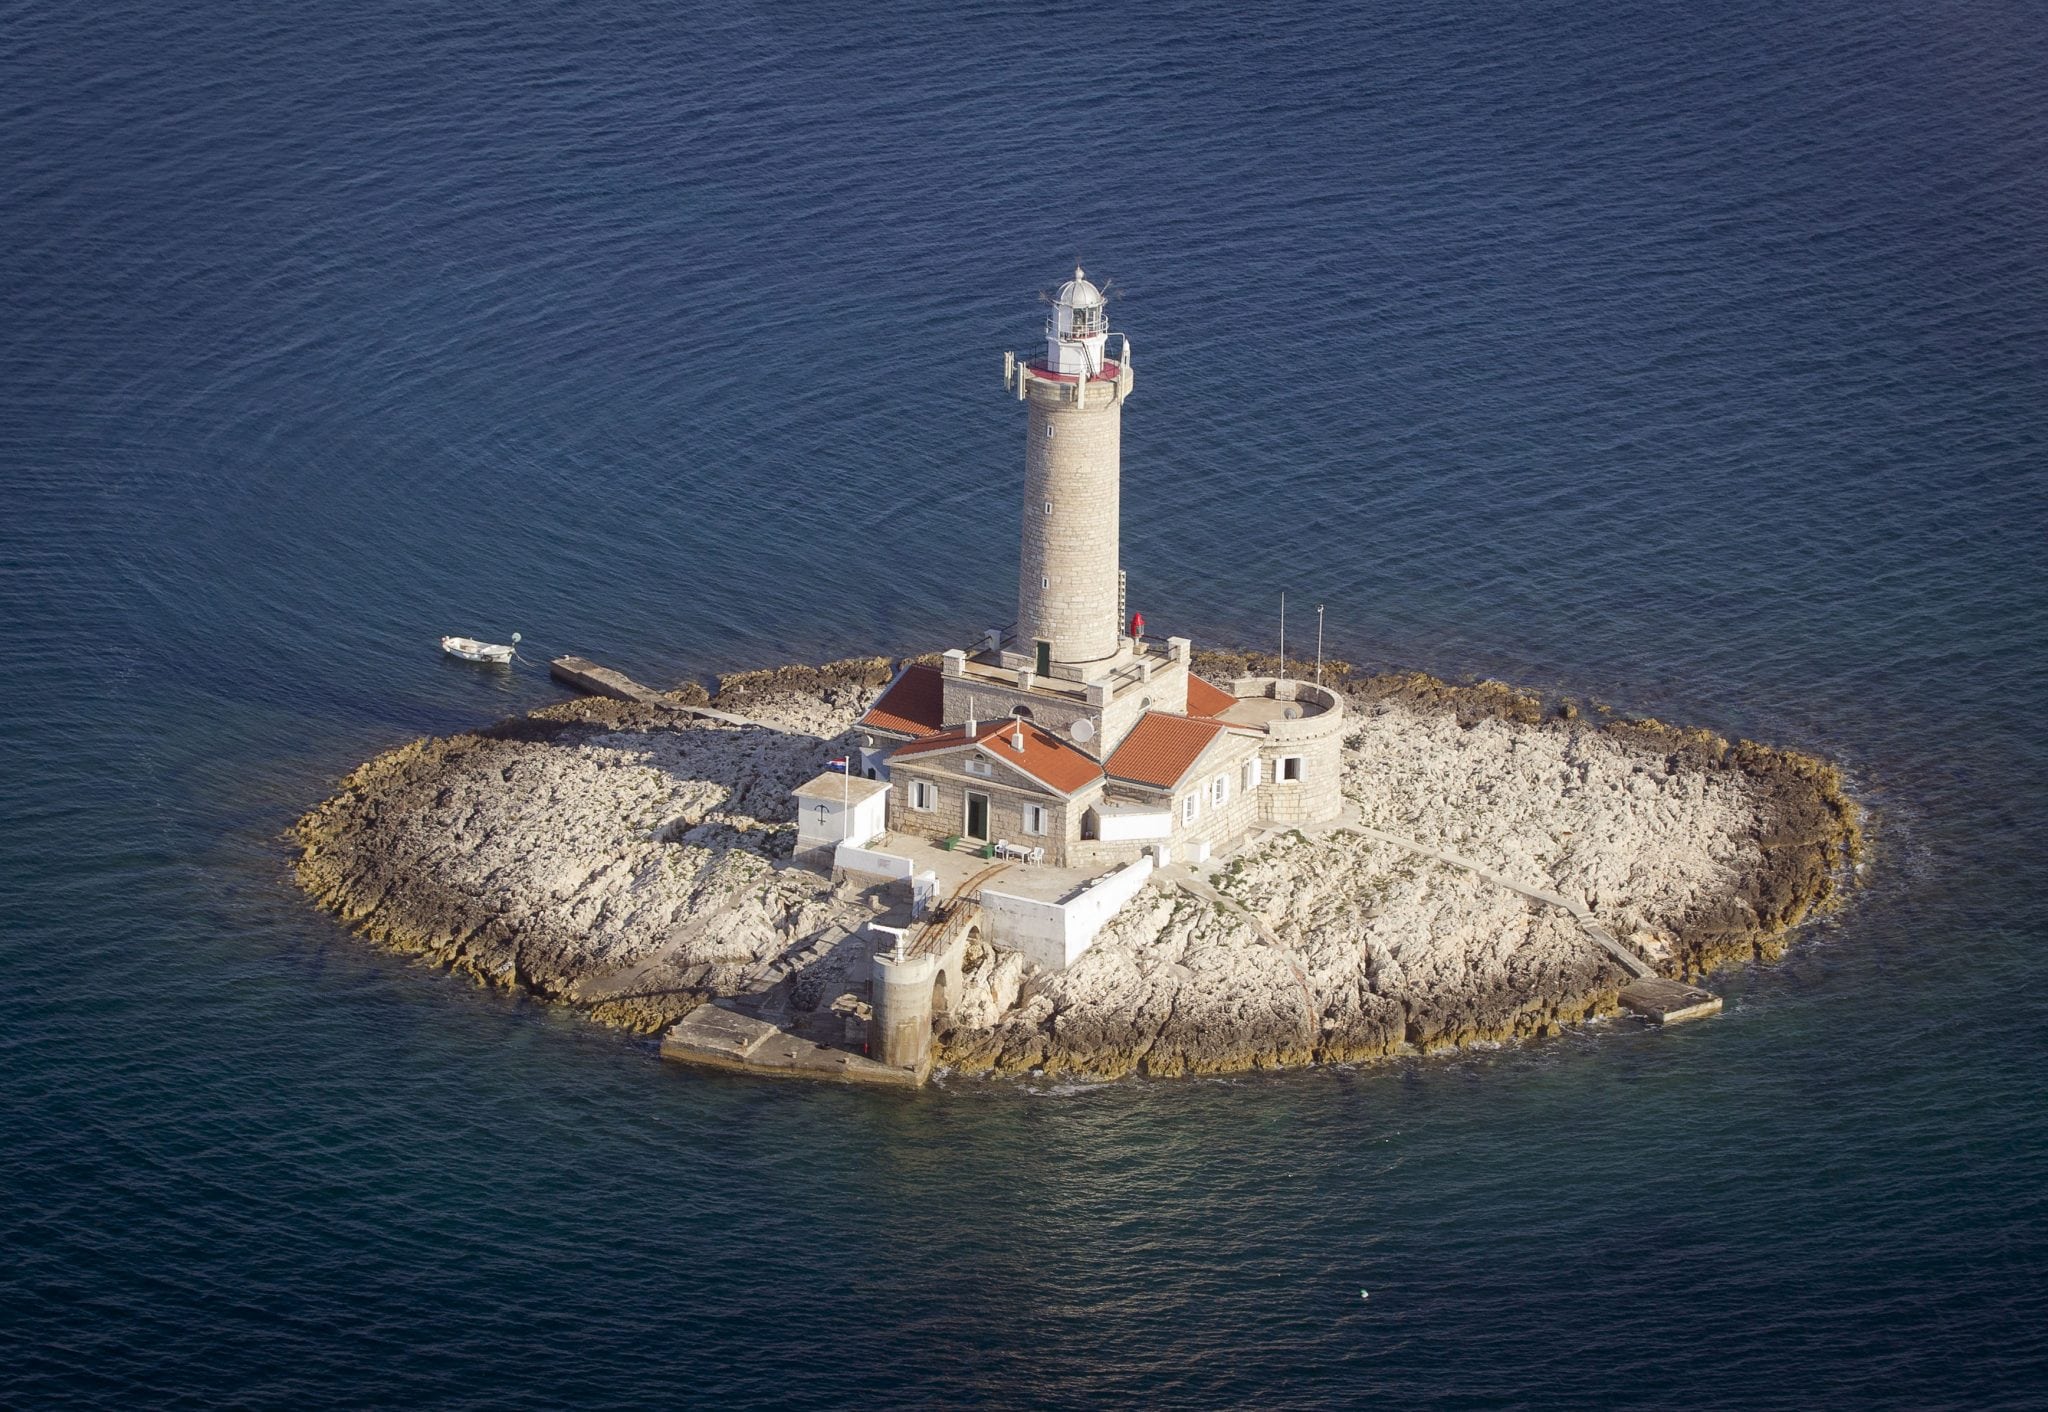 A lighthouse Porer in northern Adriatic is photographed from the air. The lighthouse is used for tourist accommodation.